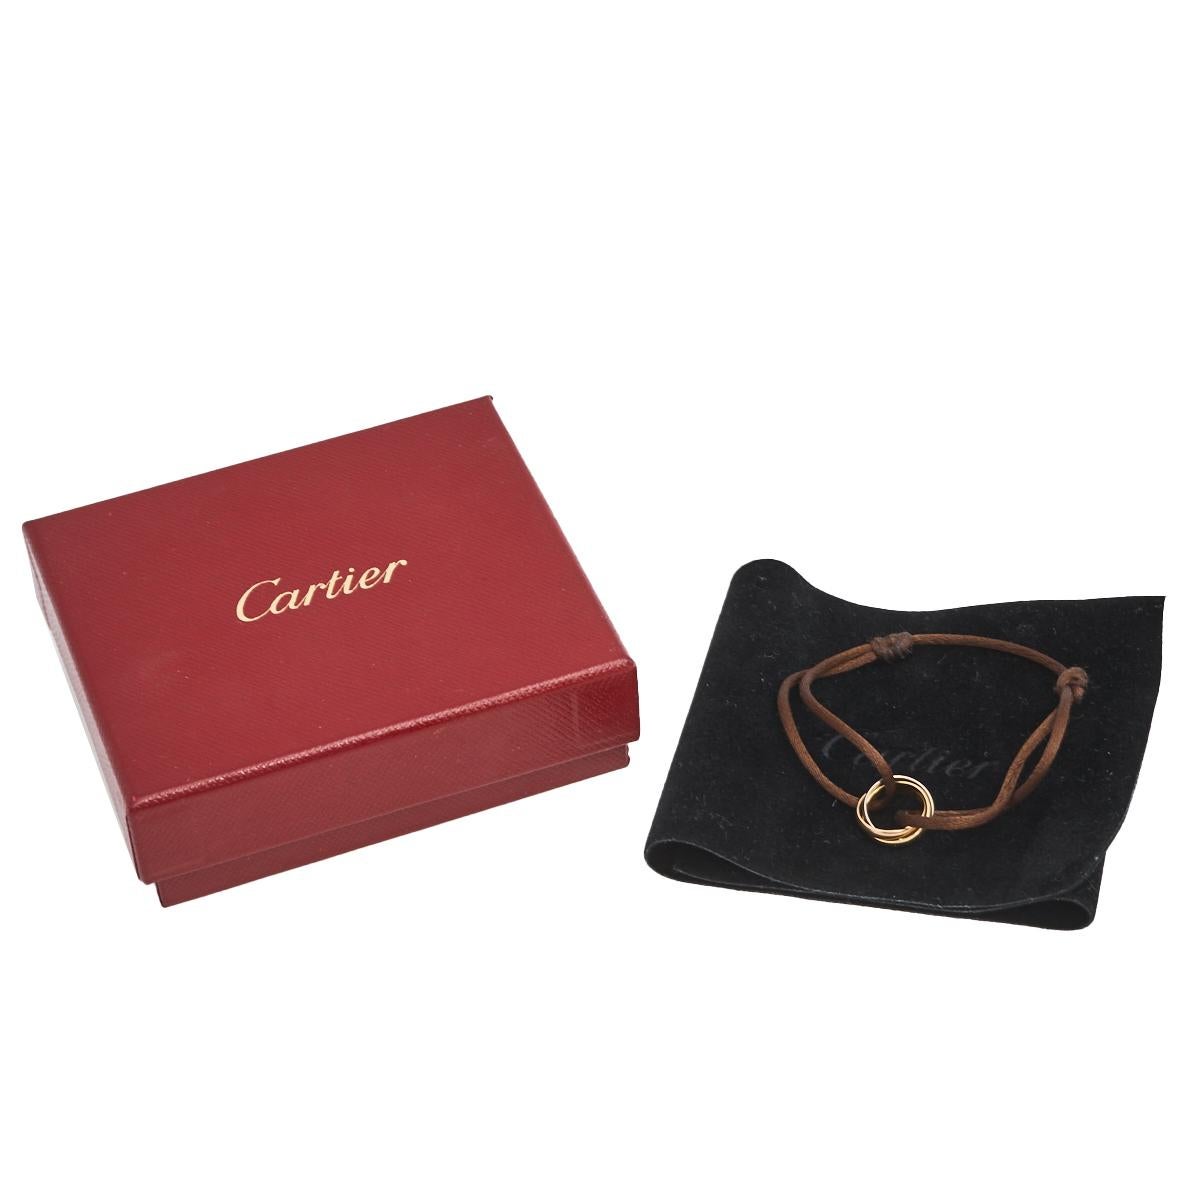 Cartier is known for making jewelry that blends art with meaning. Symbolizing that very spirit is this Trinity bracelet. The central piece is a set of three rings crafted from 18k rose, yellow and white gold each symbolizing love, fidelity, and